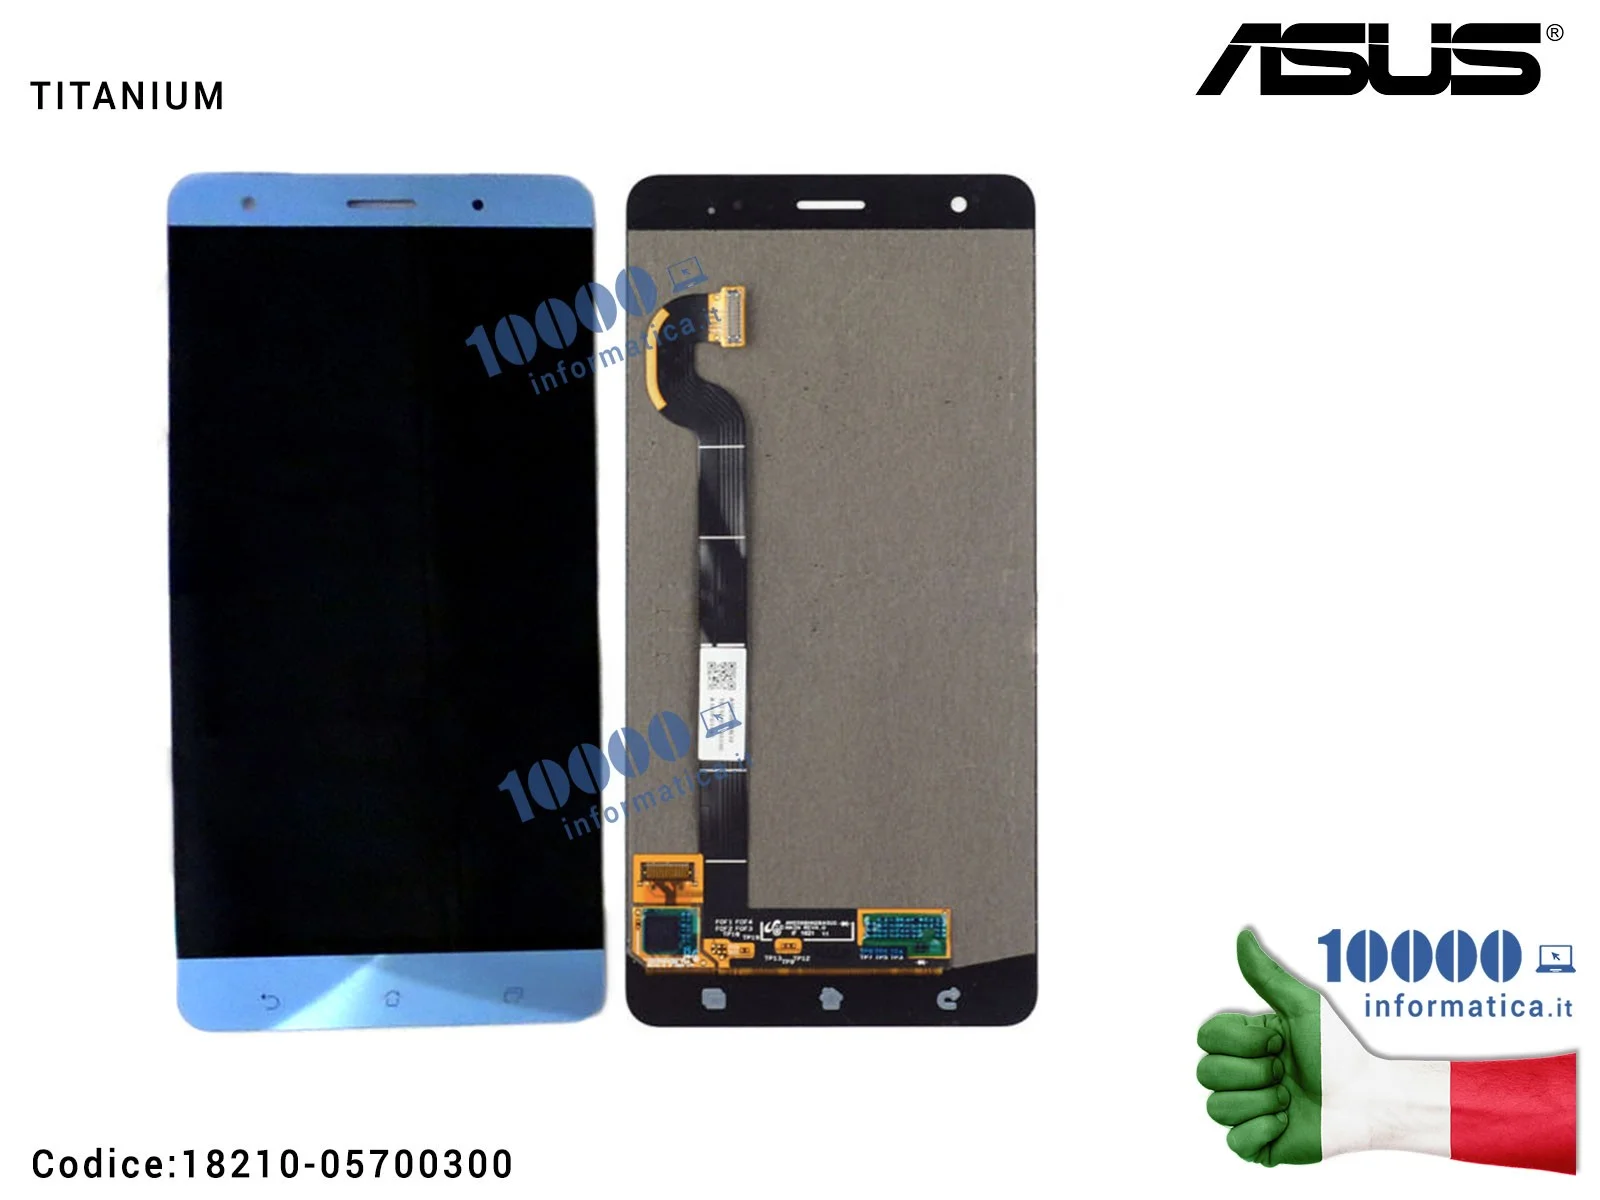 18210-05700300 Display LCD con Vetro Touch Screen ASUS ZenFone 3 Deluxe ZS570KL (Z016D) OLED 5,7'' FHD Full-HD [TITANIUM]